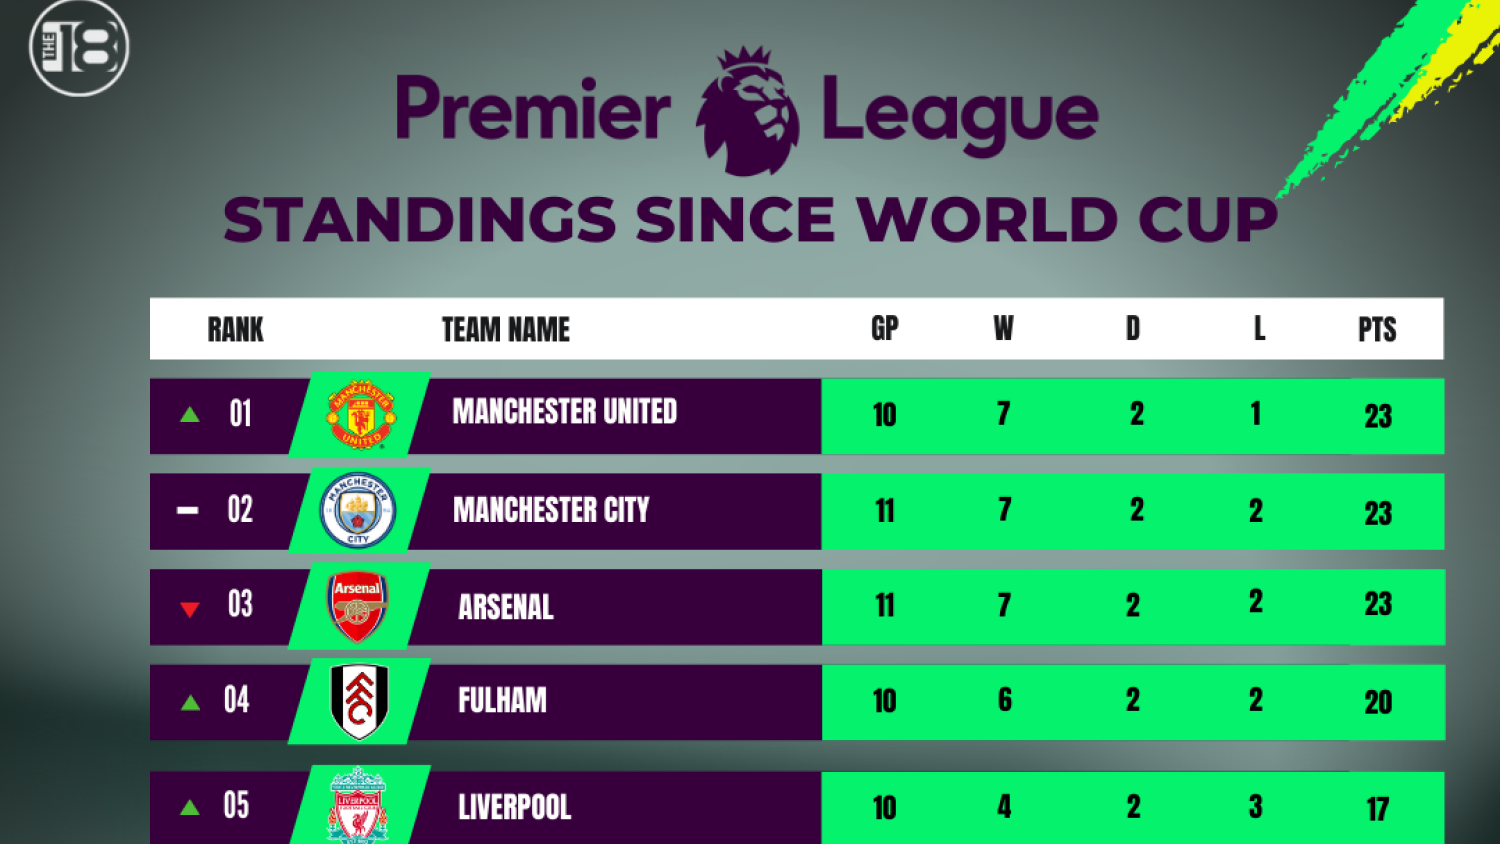 EPL table results since the World Cup Fulham are top four